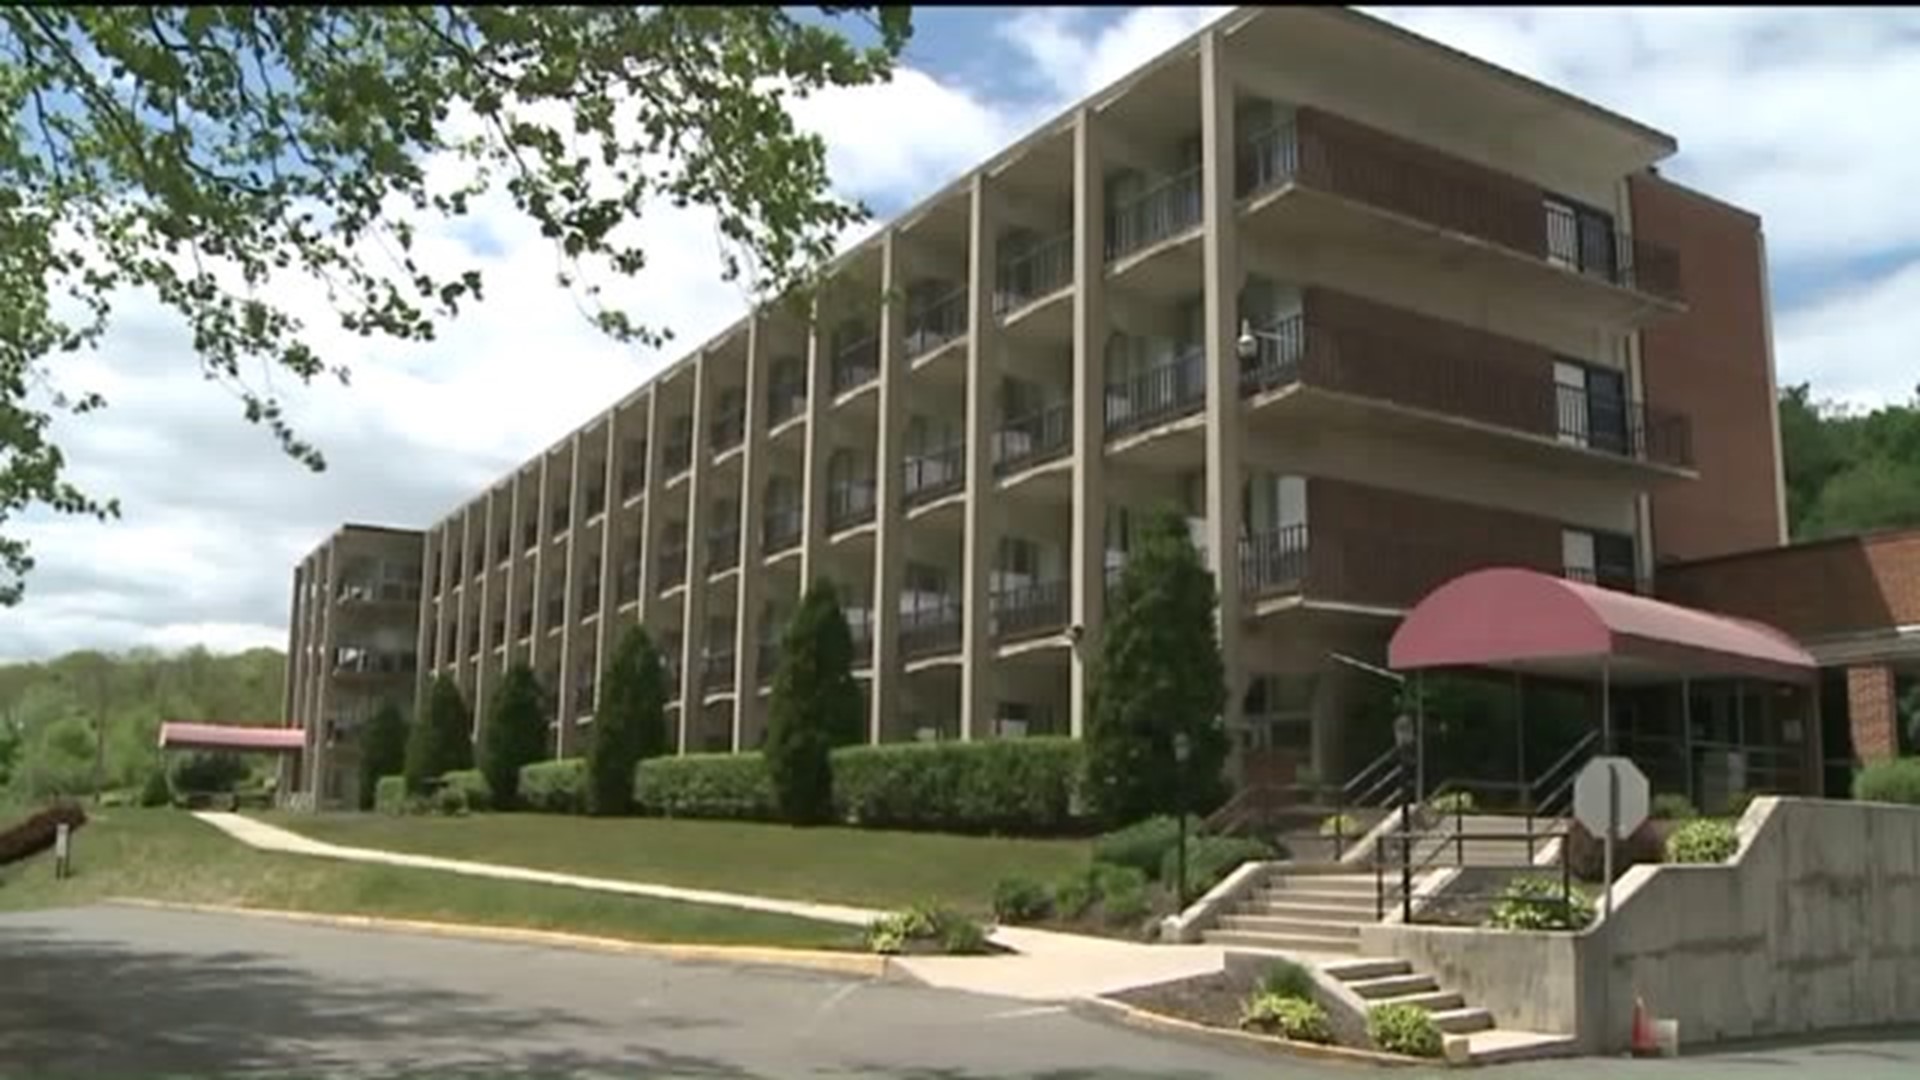 New Buyer for Schuylkill County Nursing Home